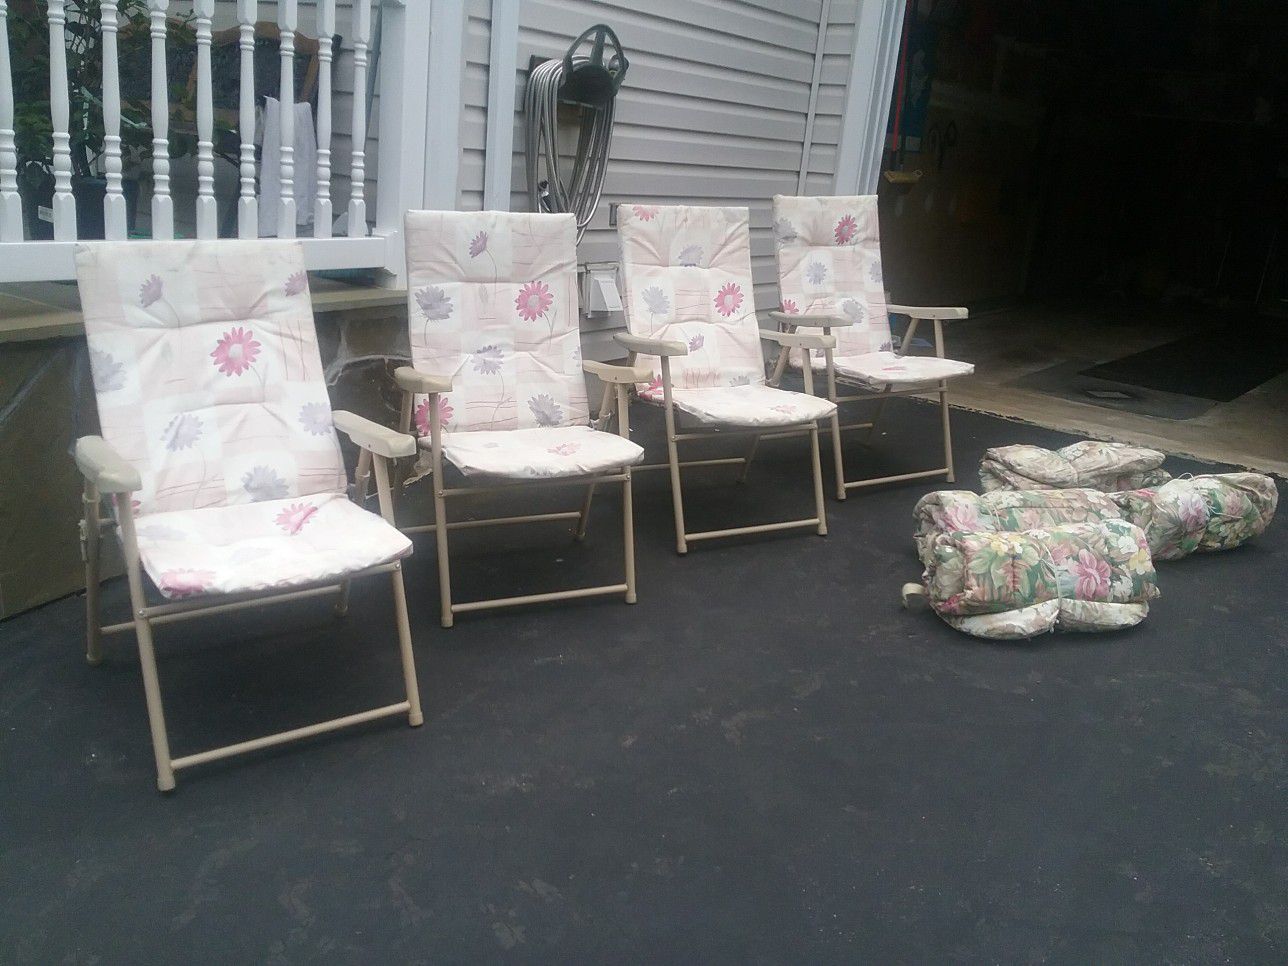 Patio/lawn chairs with cushions - free!